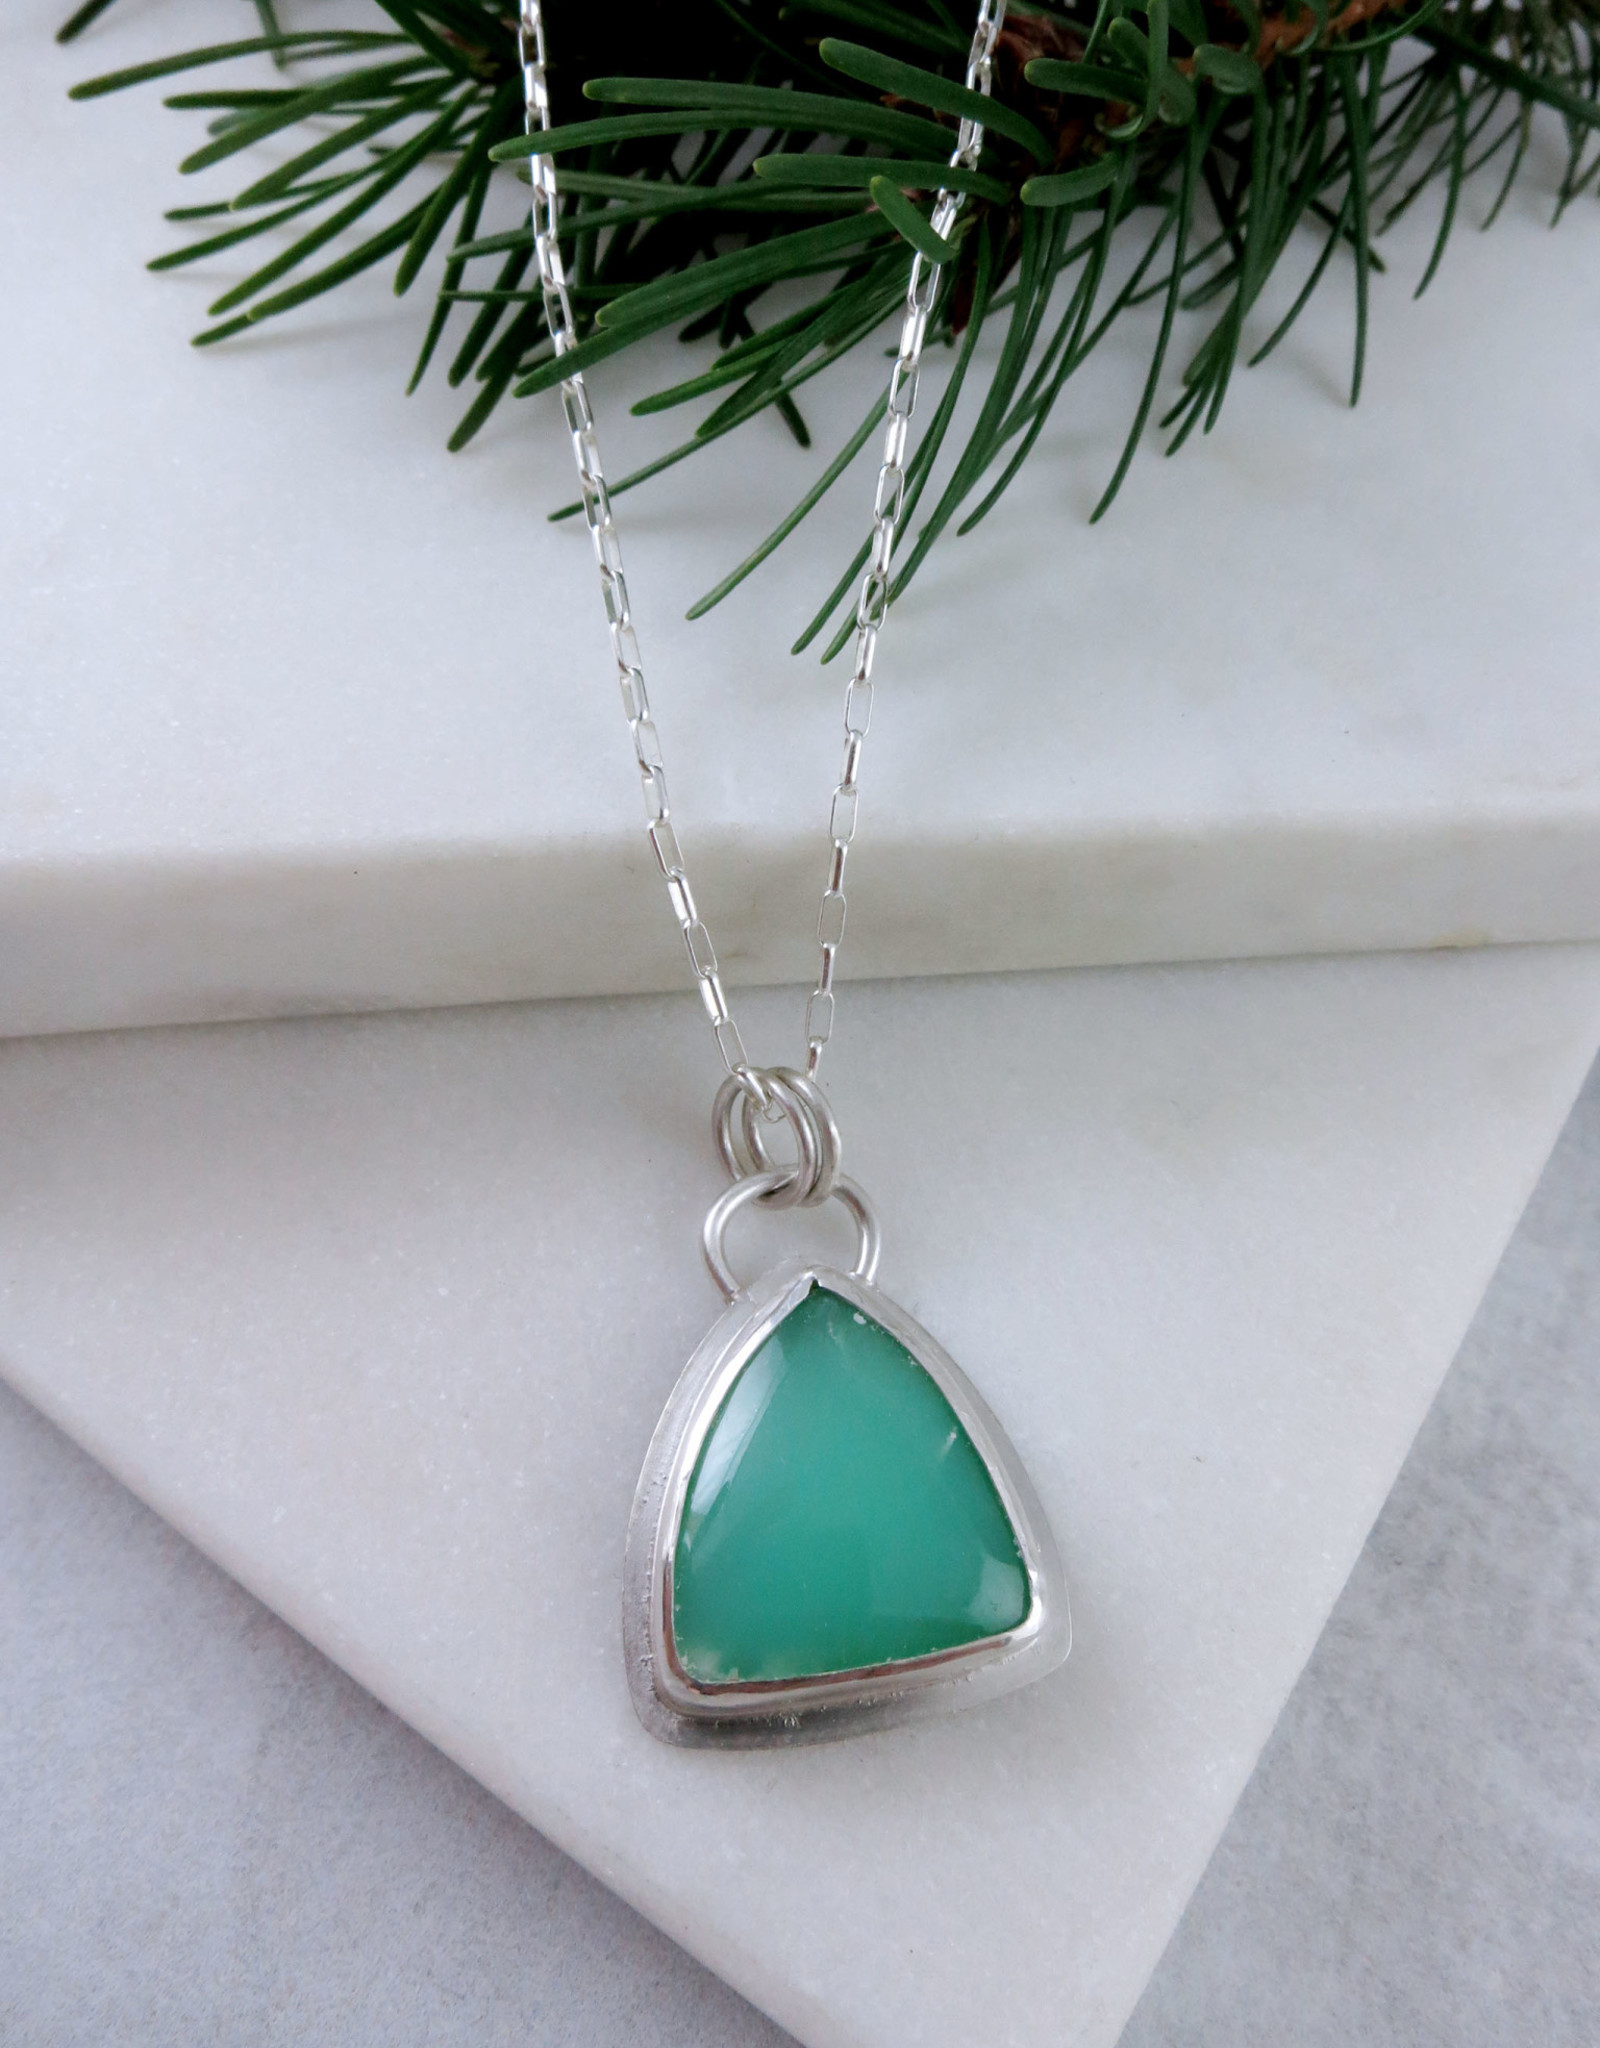 Catherine Chandler Trillium Necklace with Chrysoprase, Sterling Silver and Gold 16-18" - CCJ